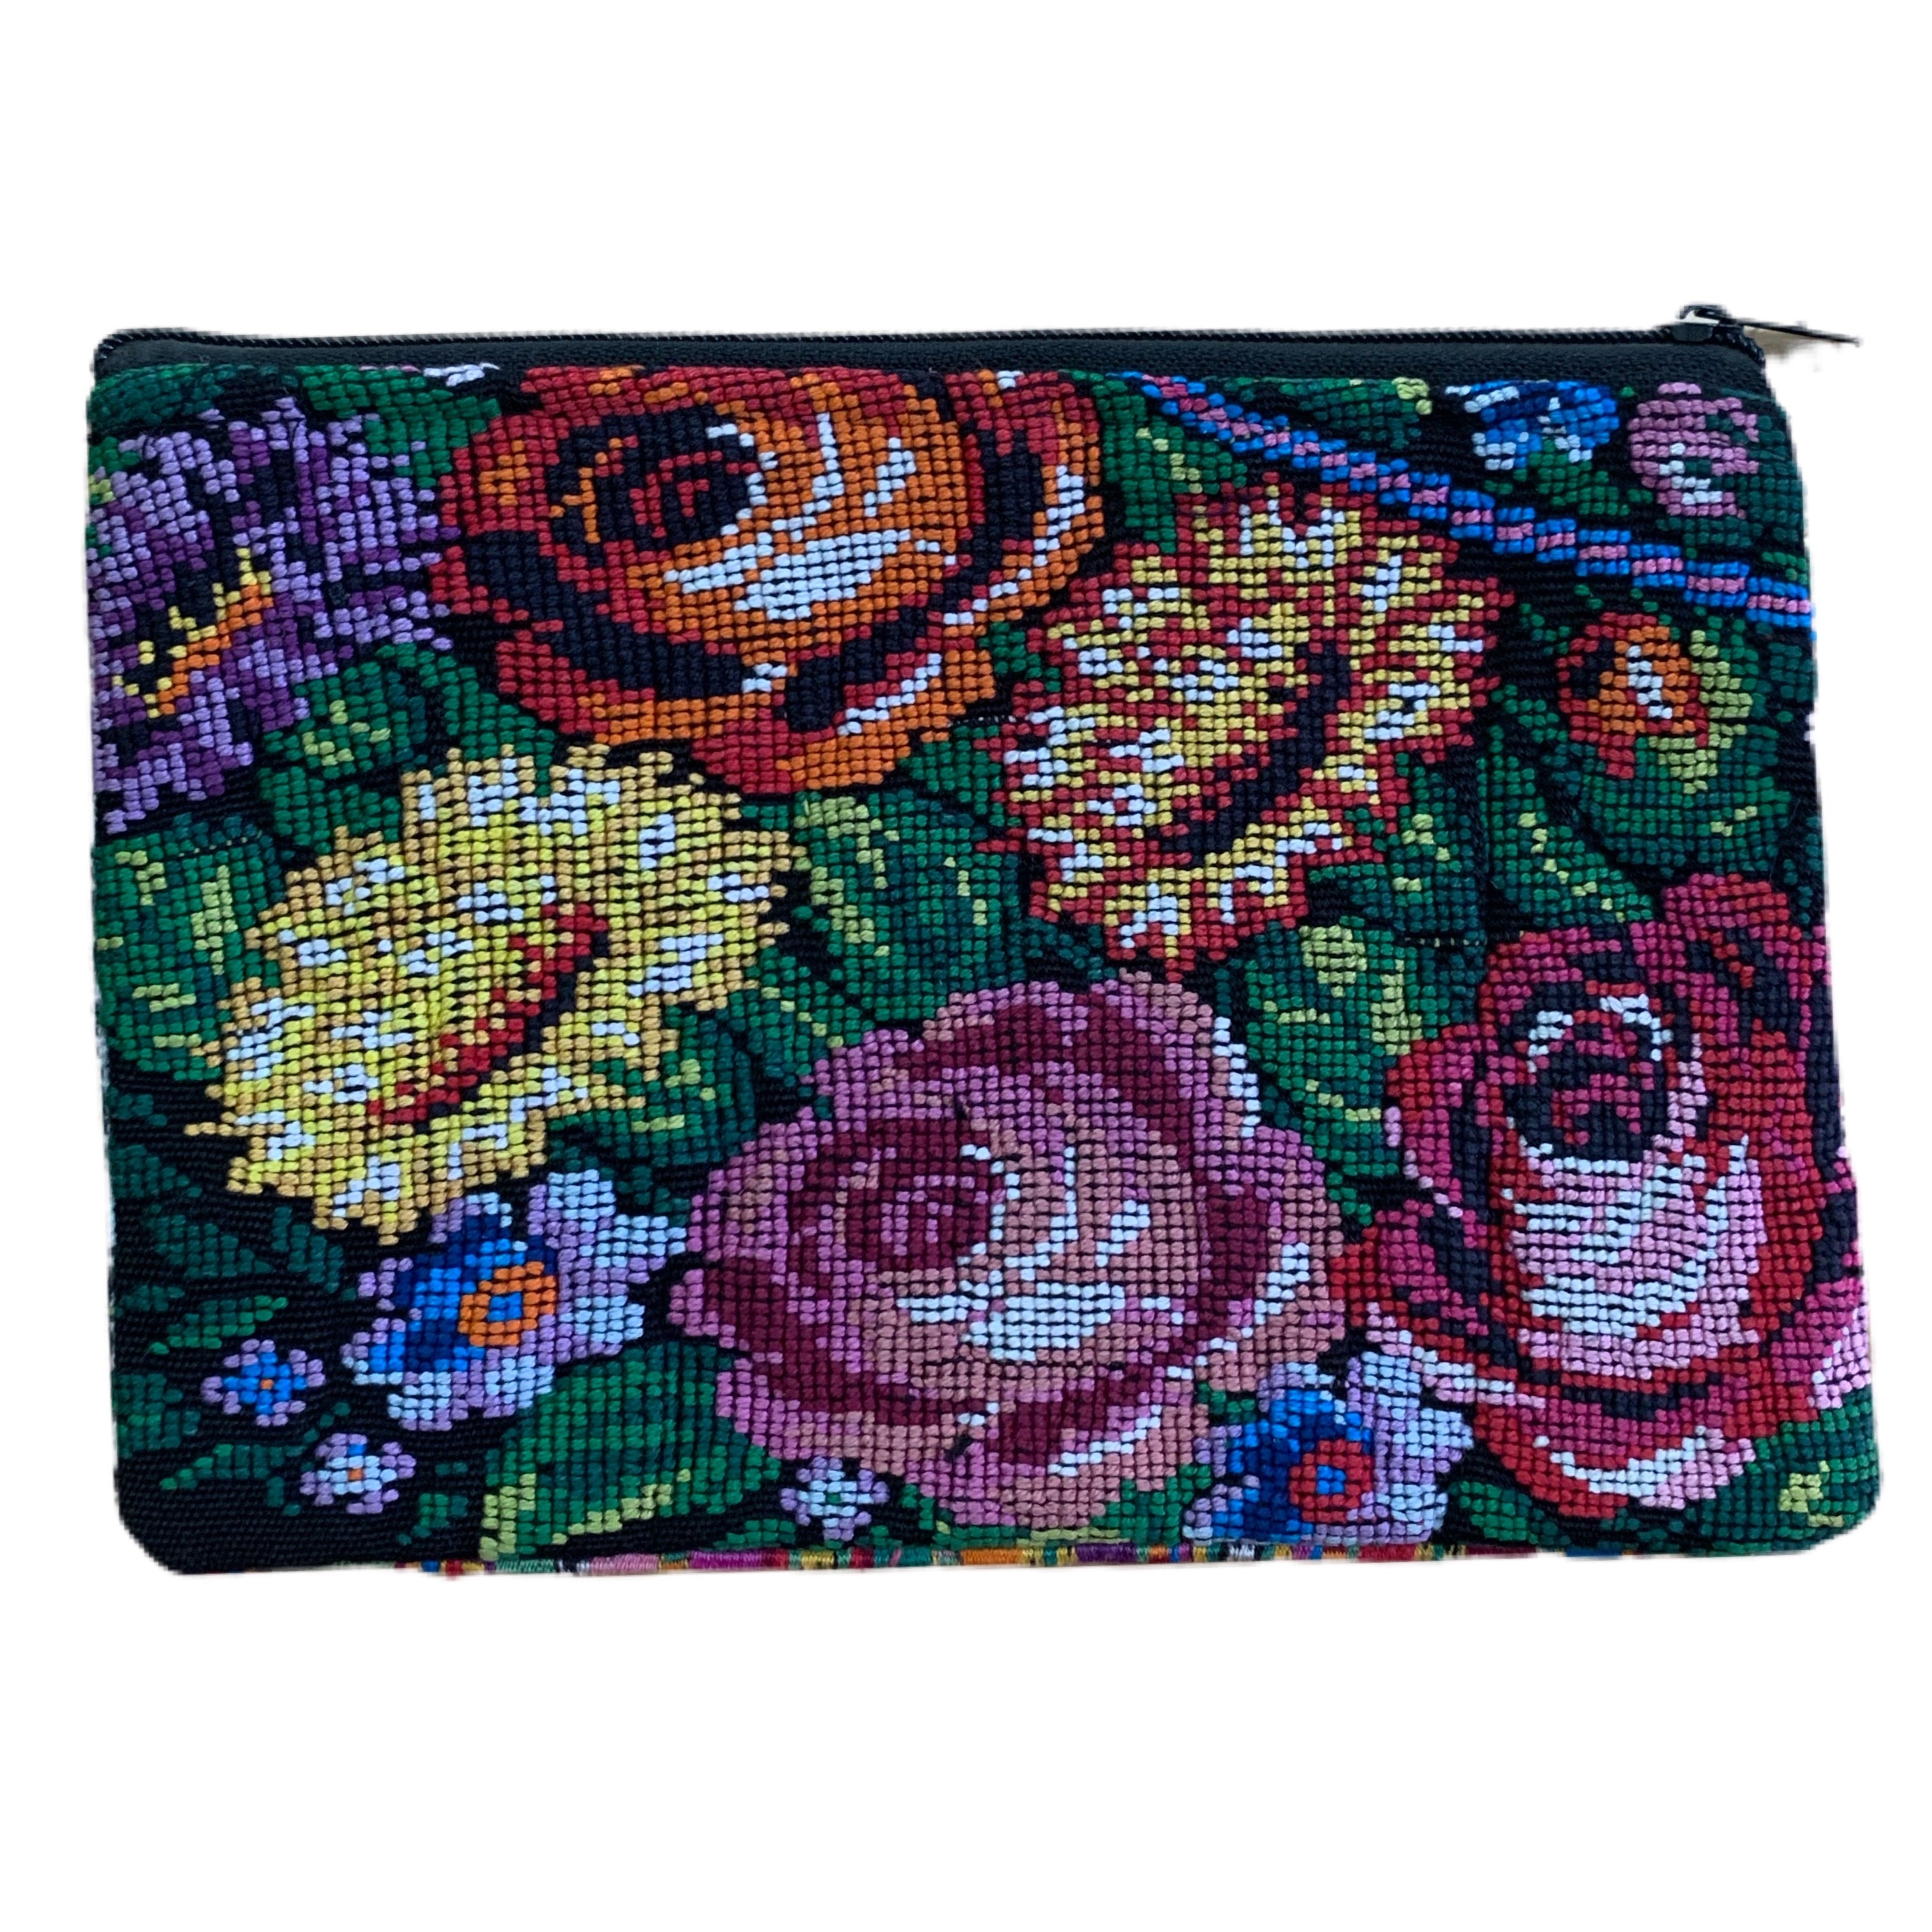 Embroidered Flower Huipil Fabric Pouch Size 8" by 6 1/2"